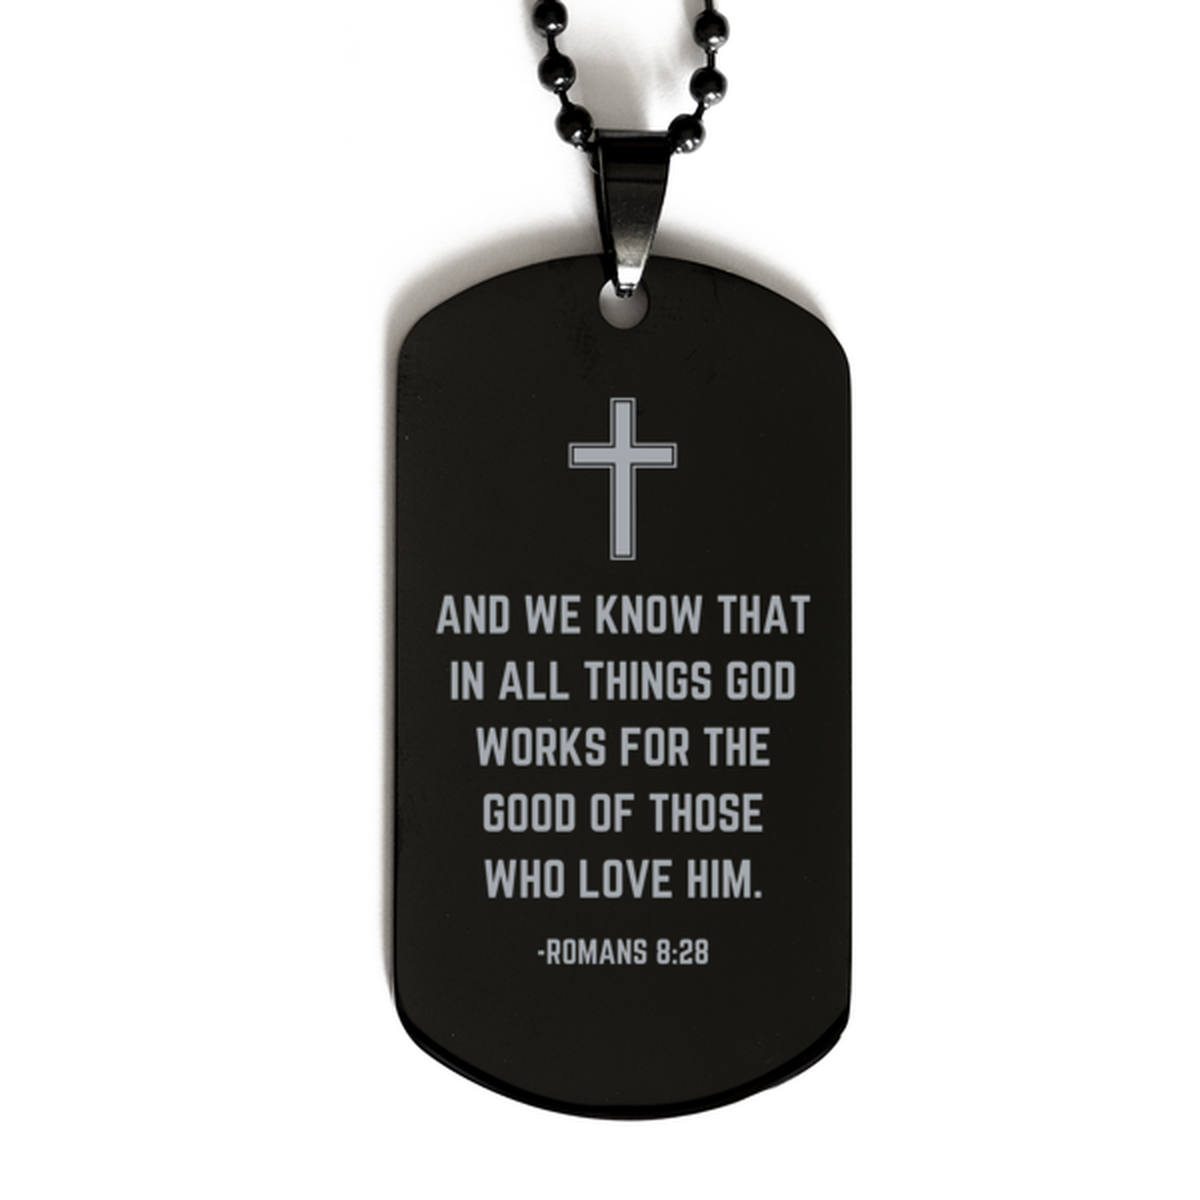 Baptism Gifts For Teenage Boys Girls, Christian Bible Verse Black Dog Tag, And we know that in all things, Confirmation Gifts, Bible Verse Necklace for Son, Godson, Grandson, Nephew